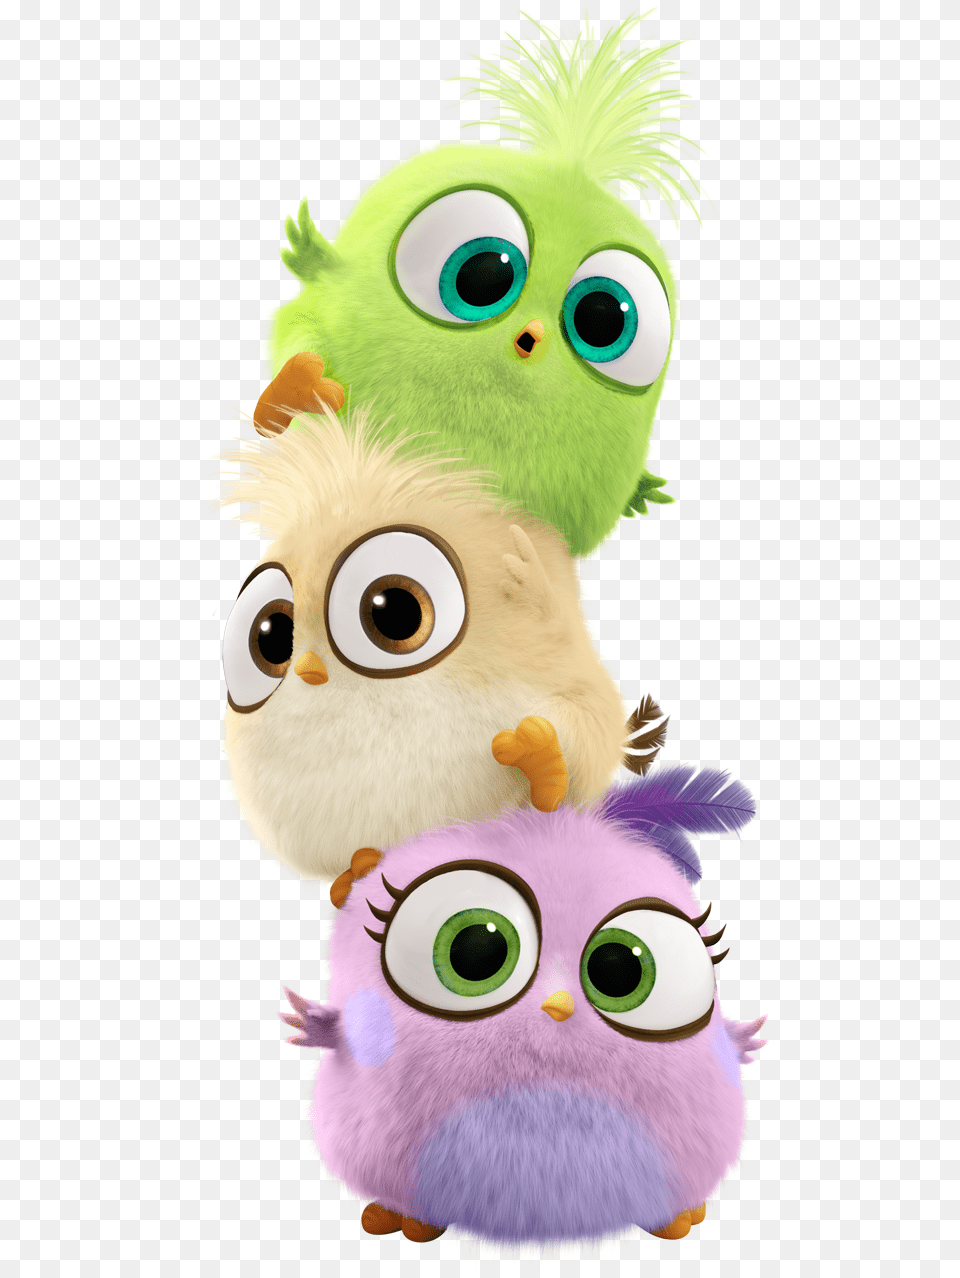 Angry Bird Hd Clipart Uploaded By The Best User Angry Birds 2 Baby Birds, Plush, Toy, Animal Free Transparent Png